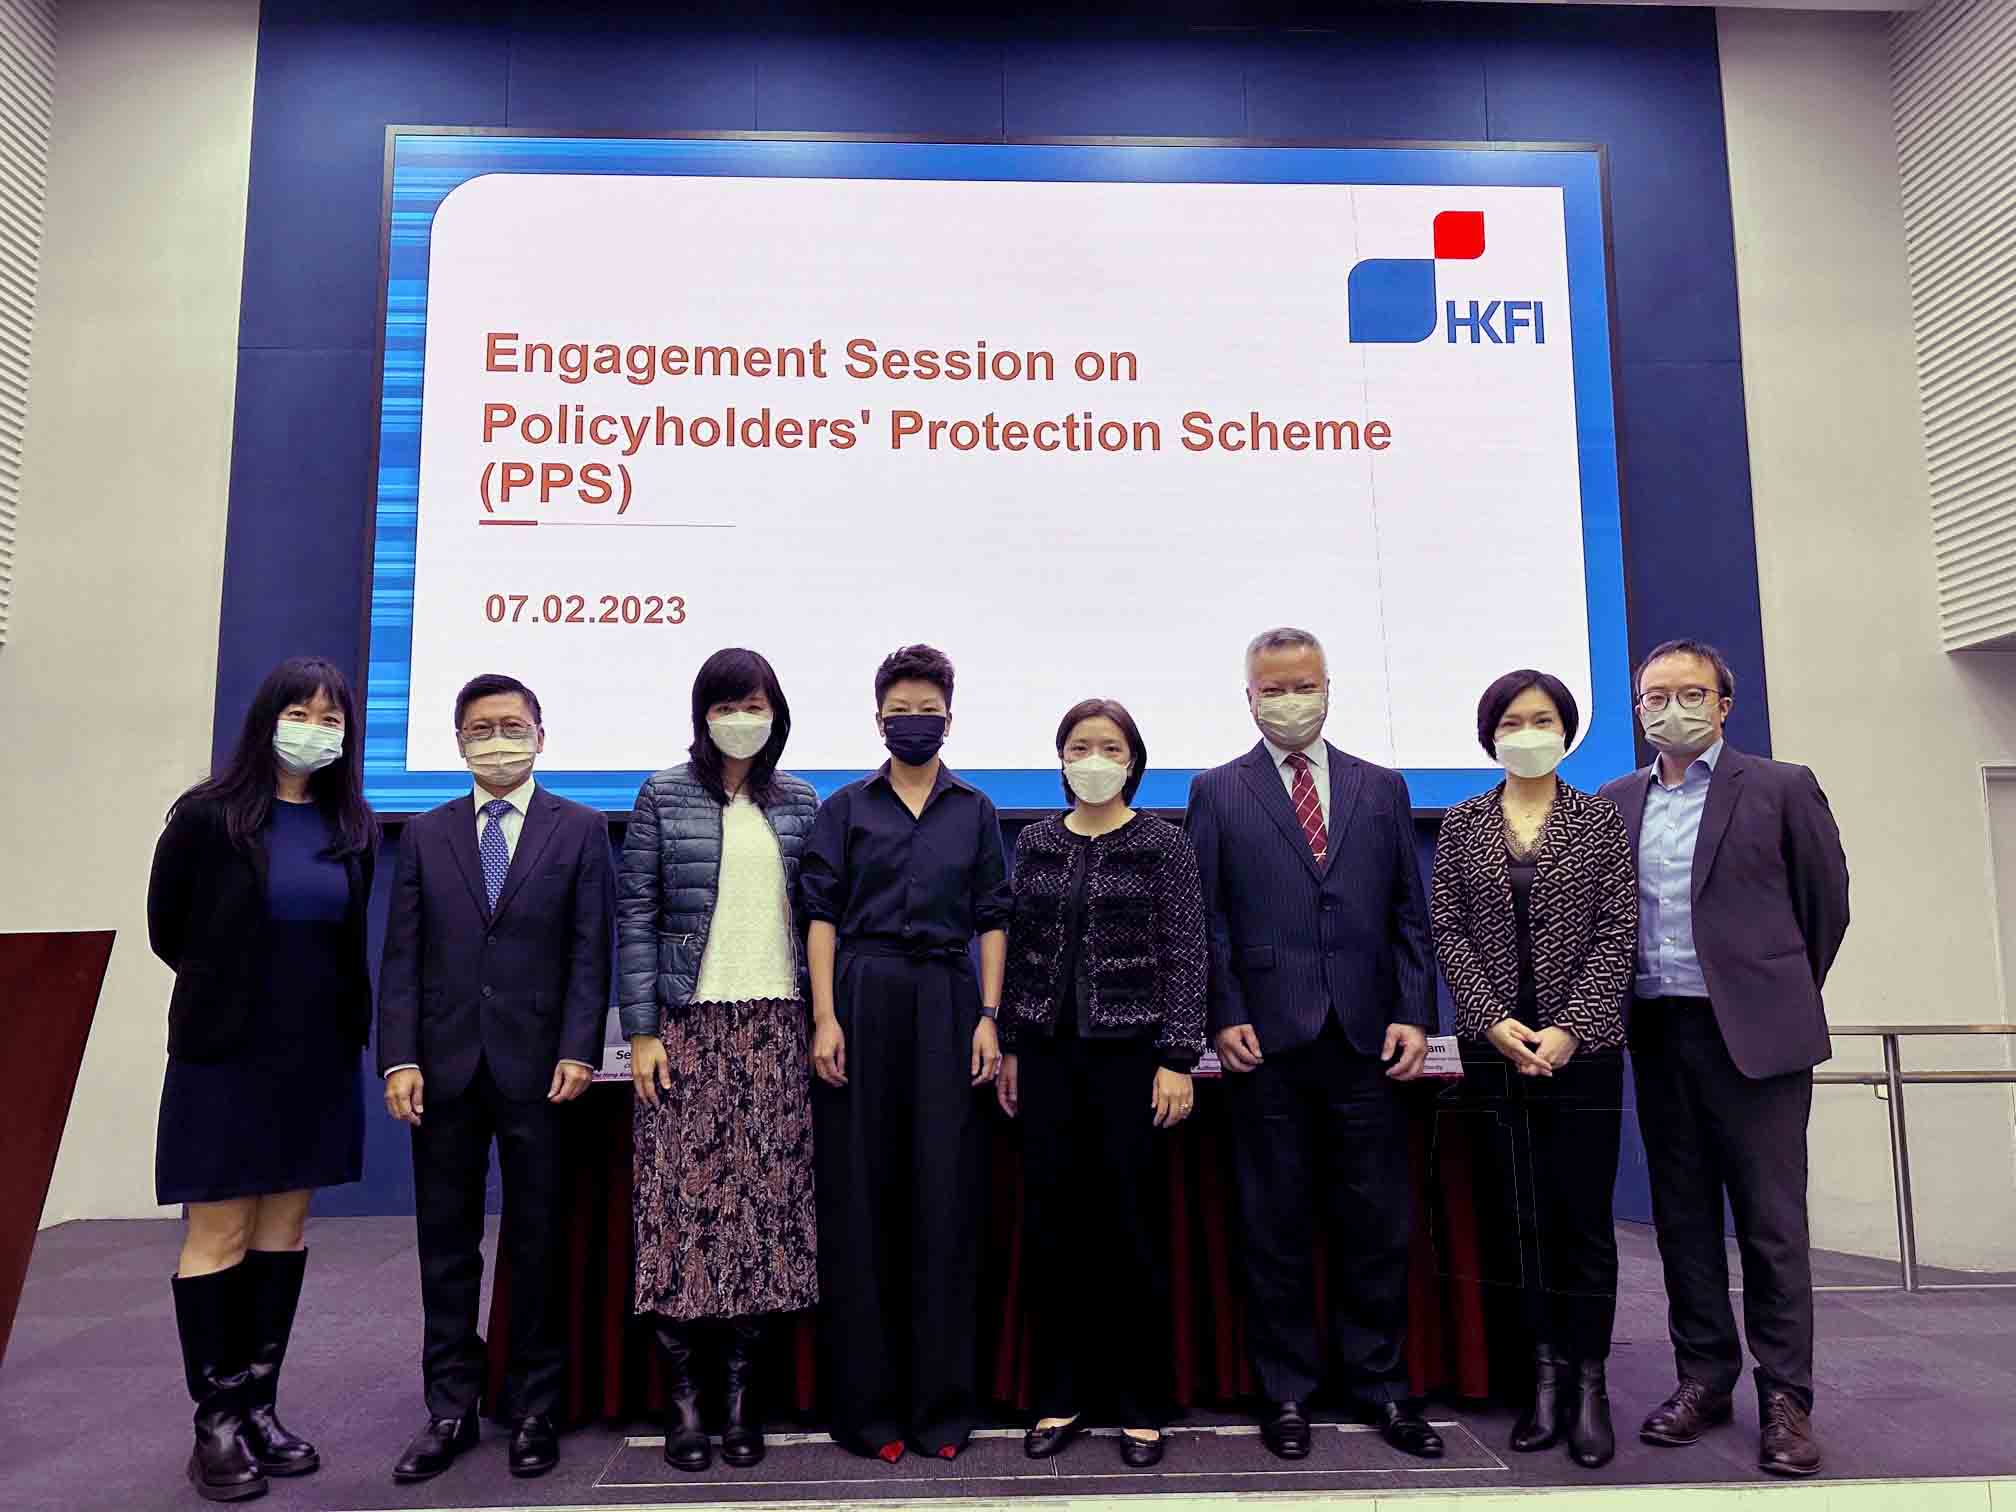 Engagement Session on Policyholder Protection Schemes (PPS)